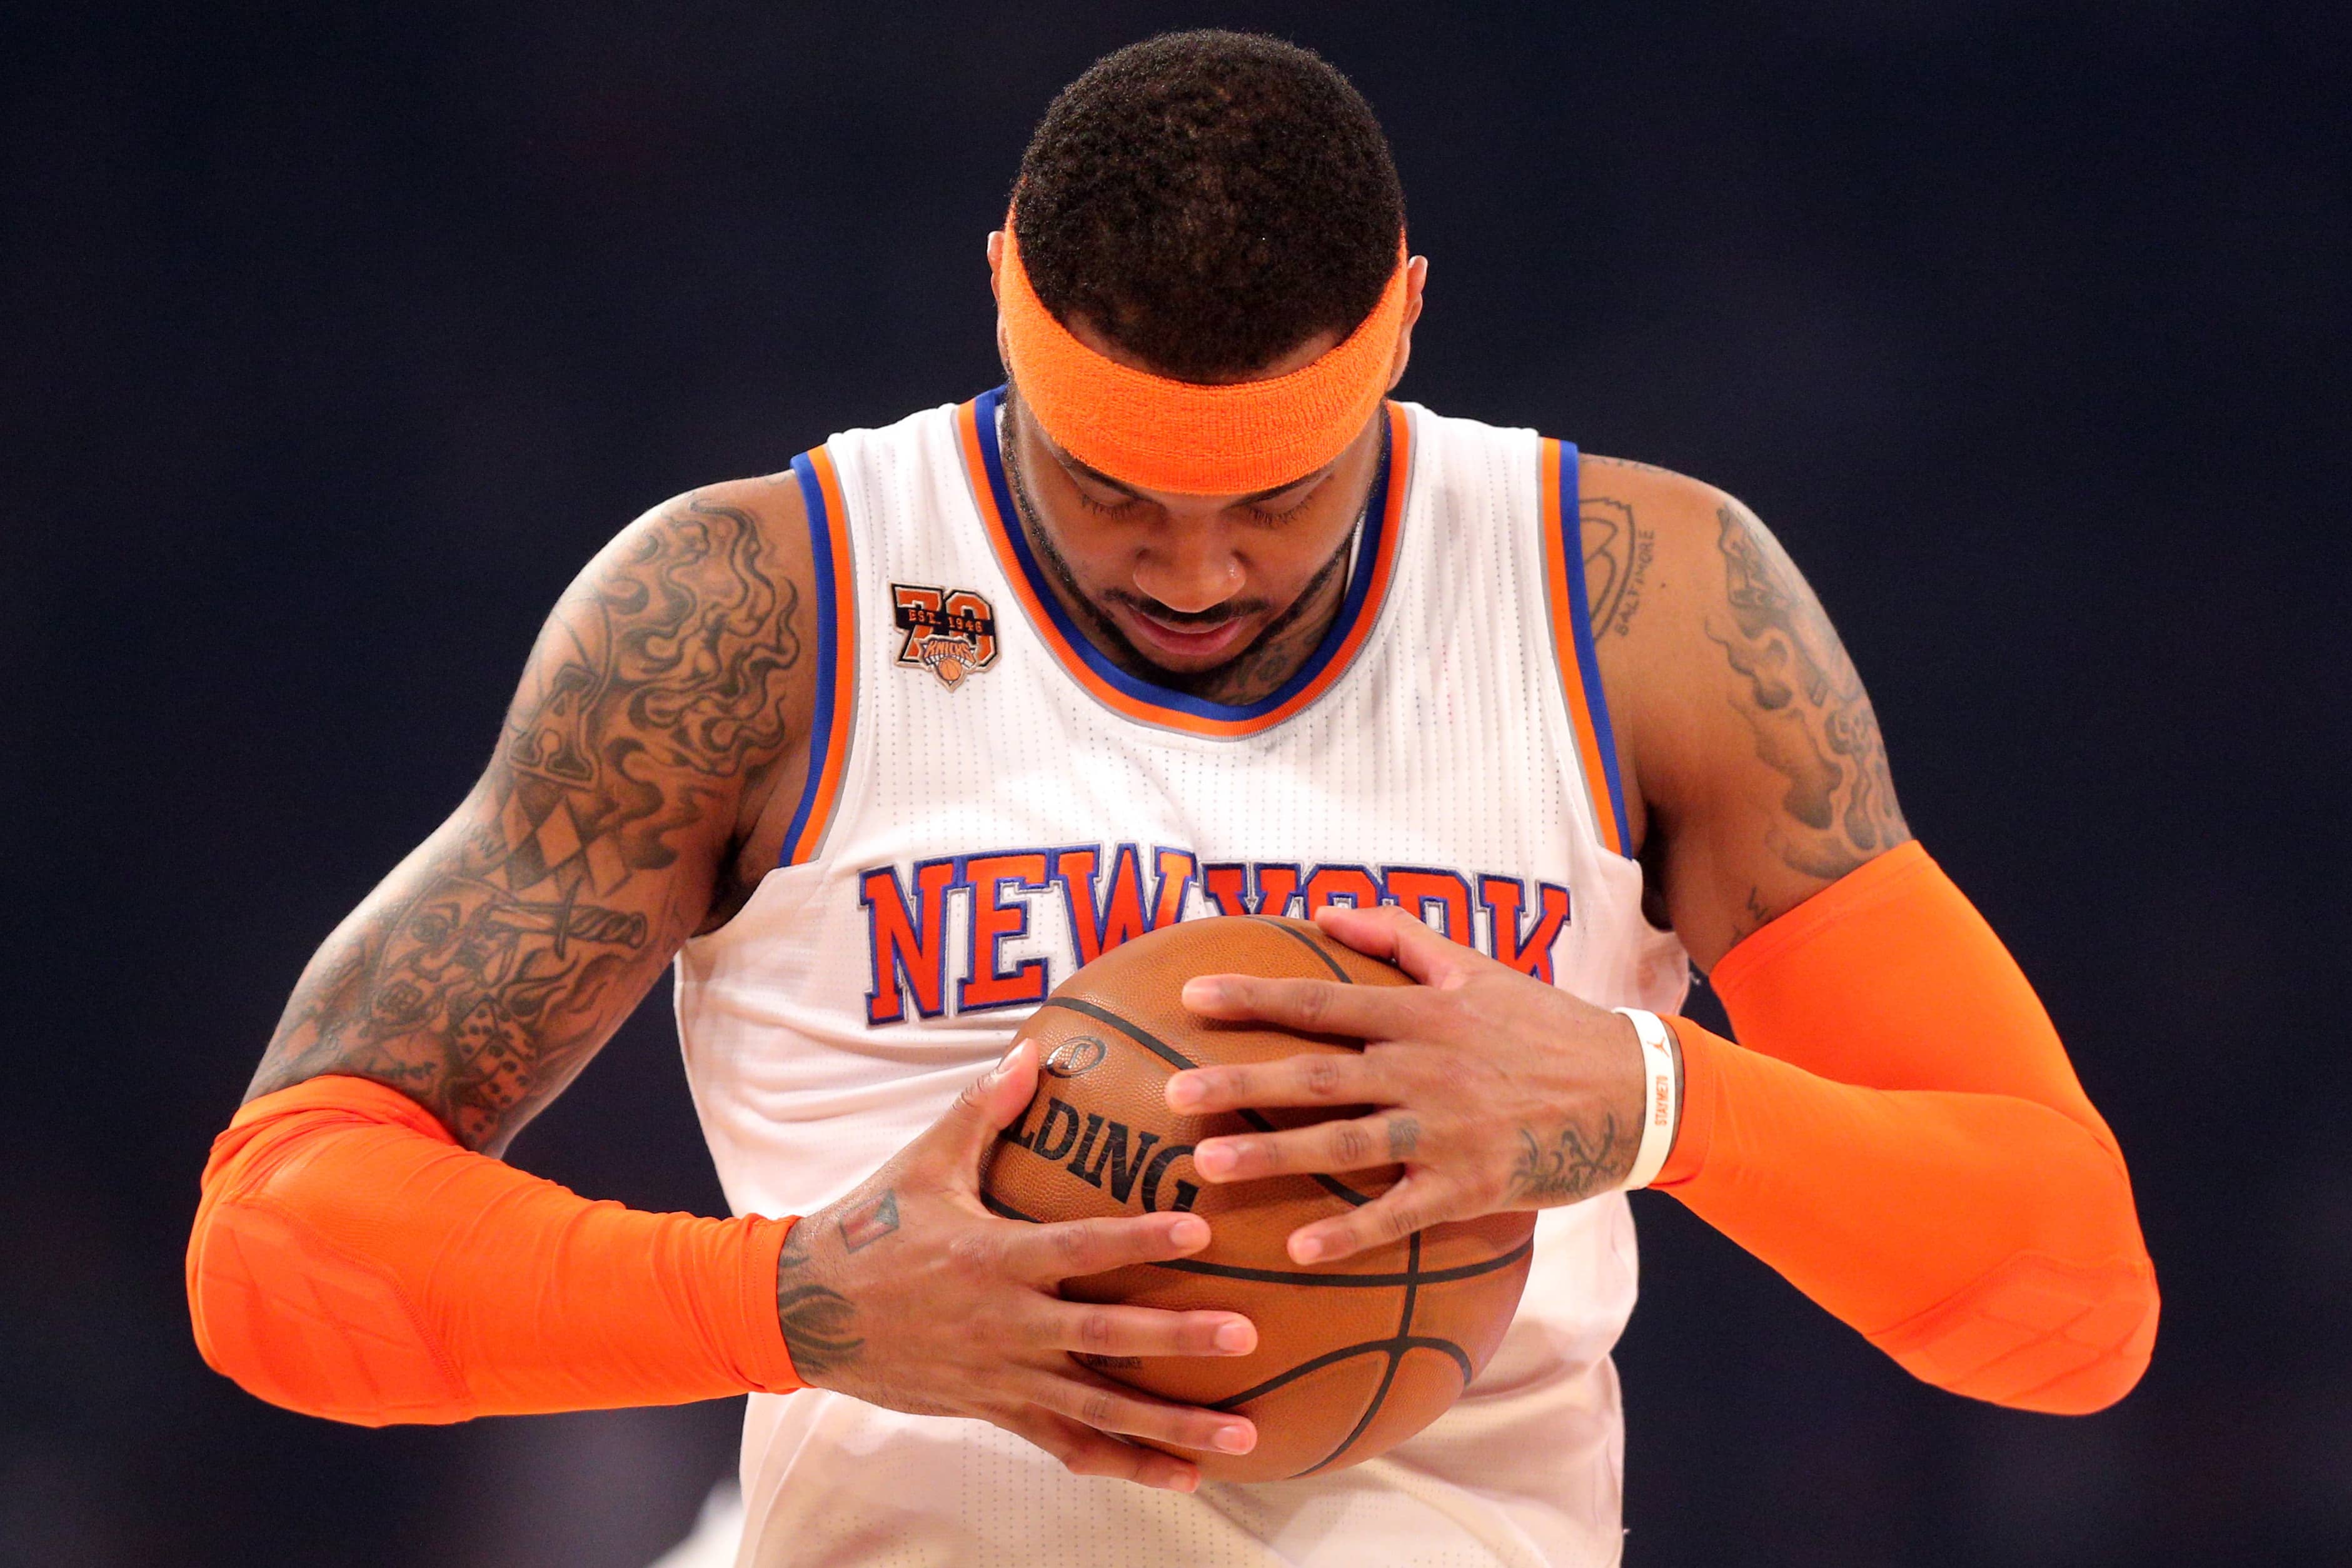 New York Knicks: Carmelo Anthony's Top 5 Games In NY